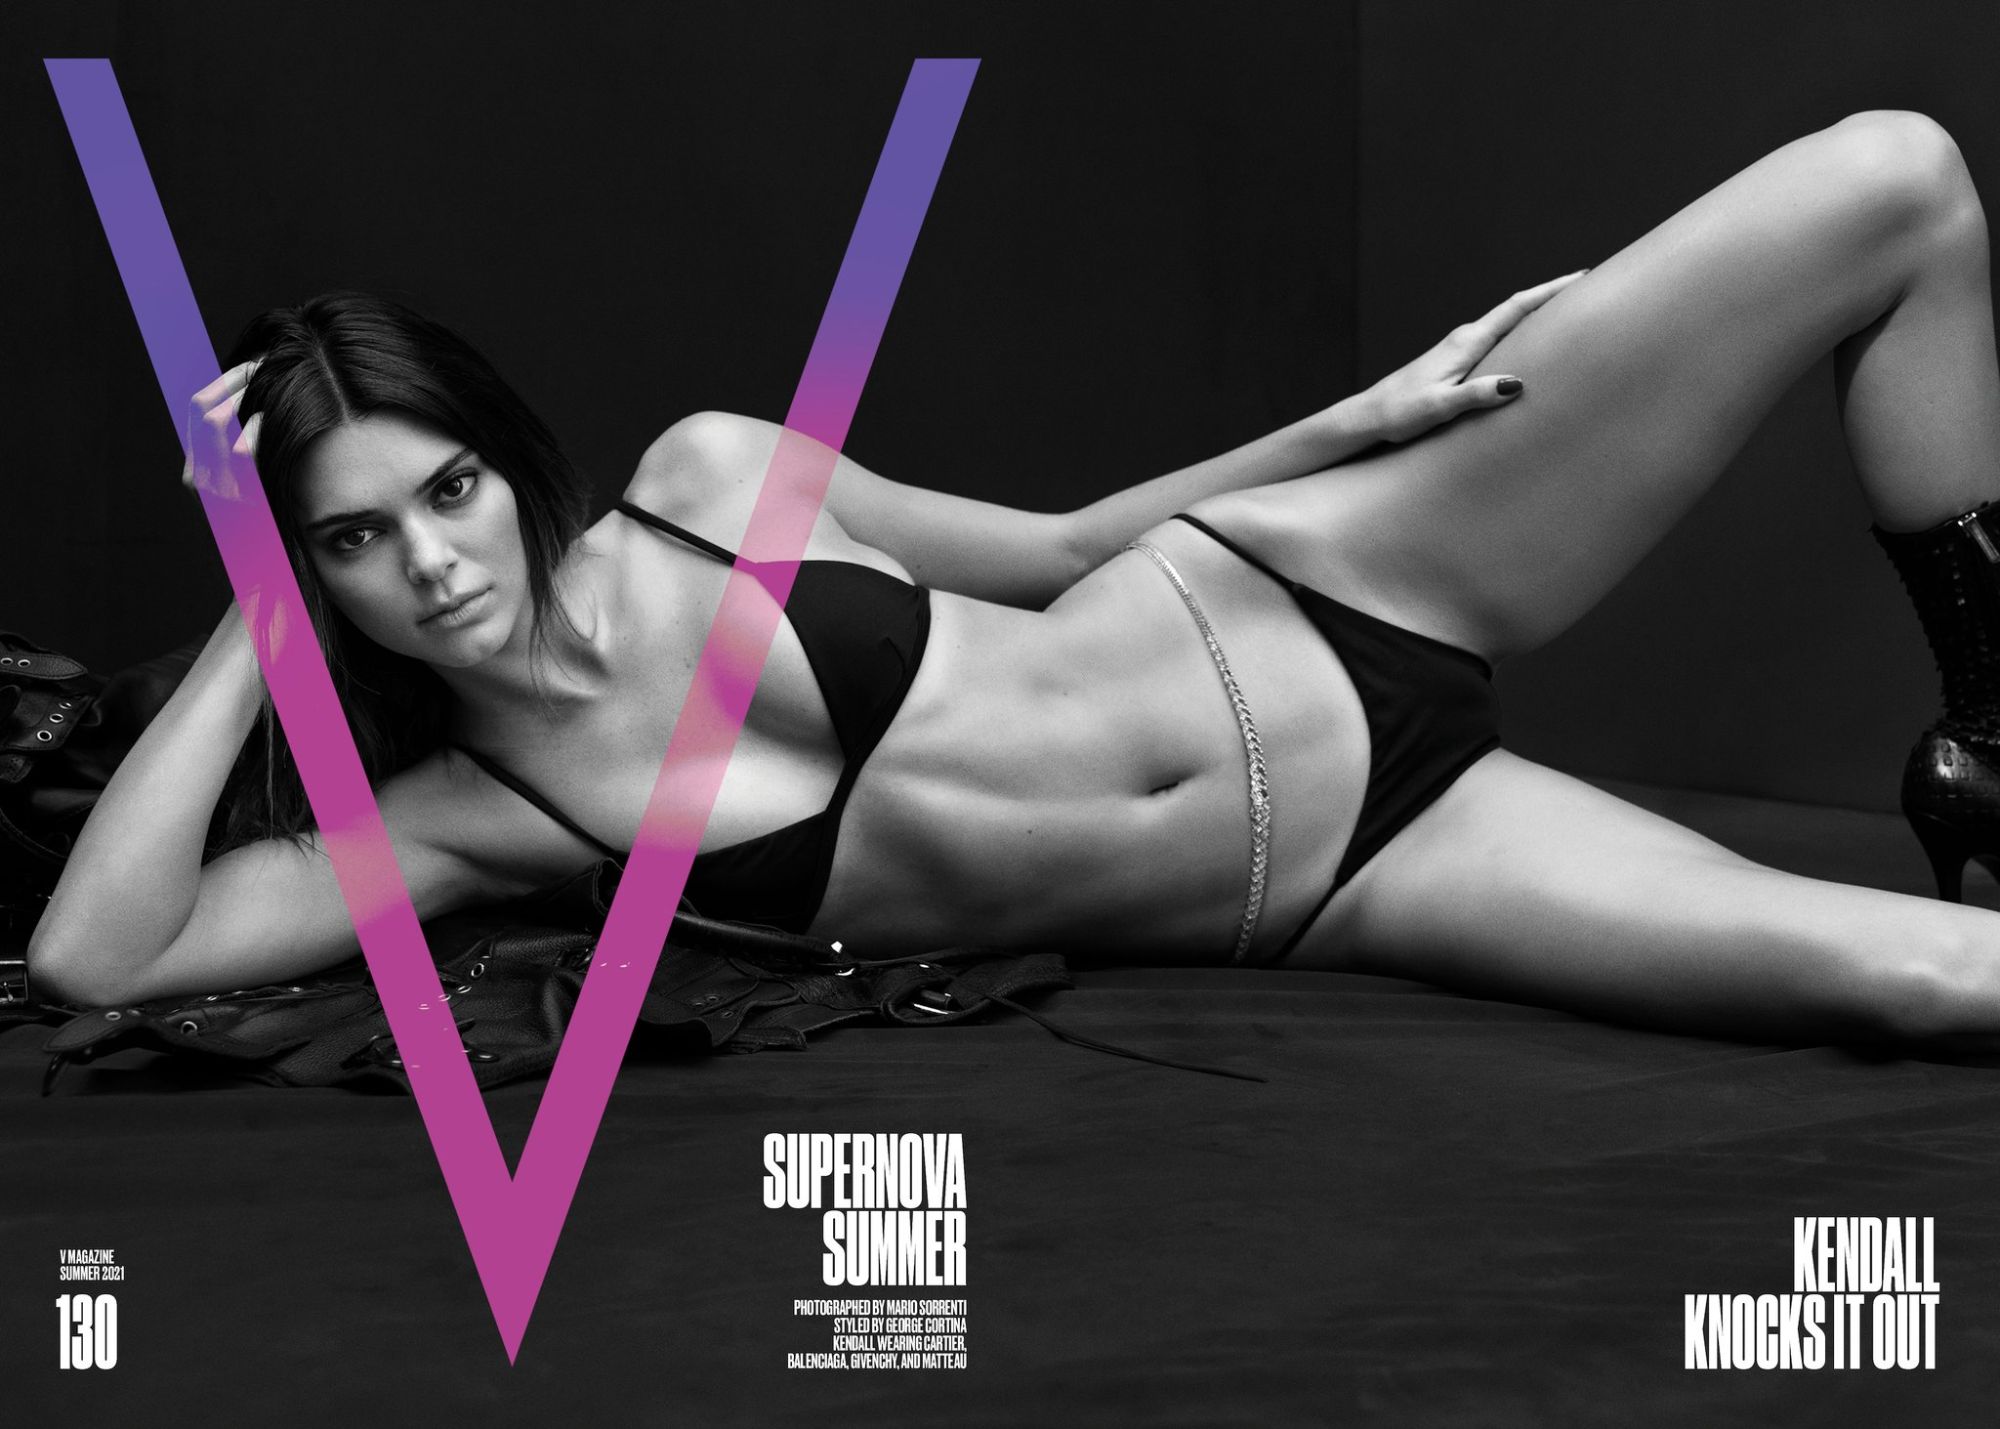 Kendall Jenner Covers V Magazine Summer 2021. Clothing & Jewelry: Matteau Black Petite Triangle recycled bikini top / Matteau Black The Classic bikini briefs; Jacket by Balenciaga; Boots by Givenchy; Necklace by Cartier